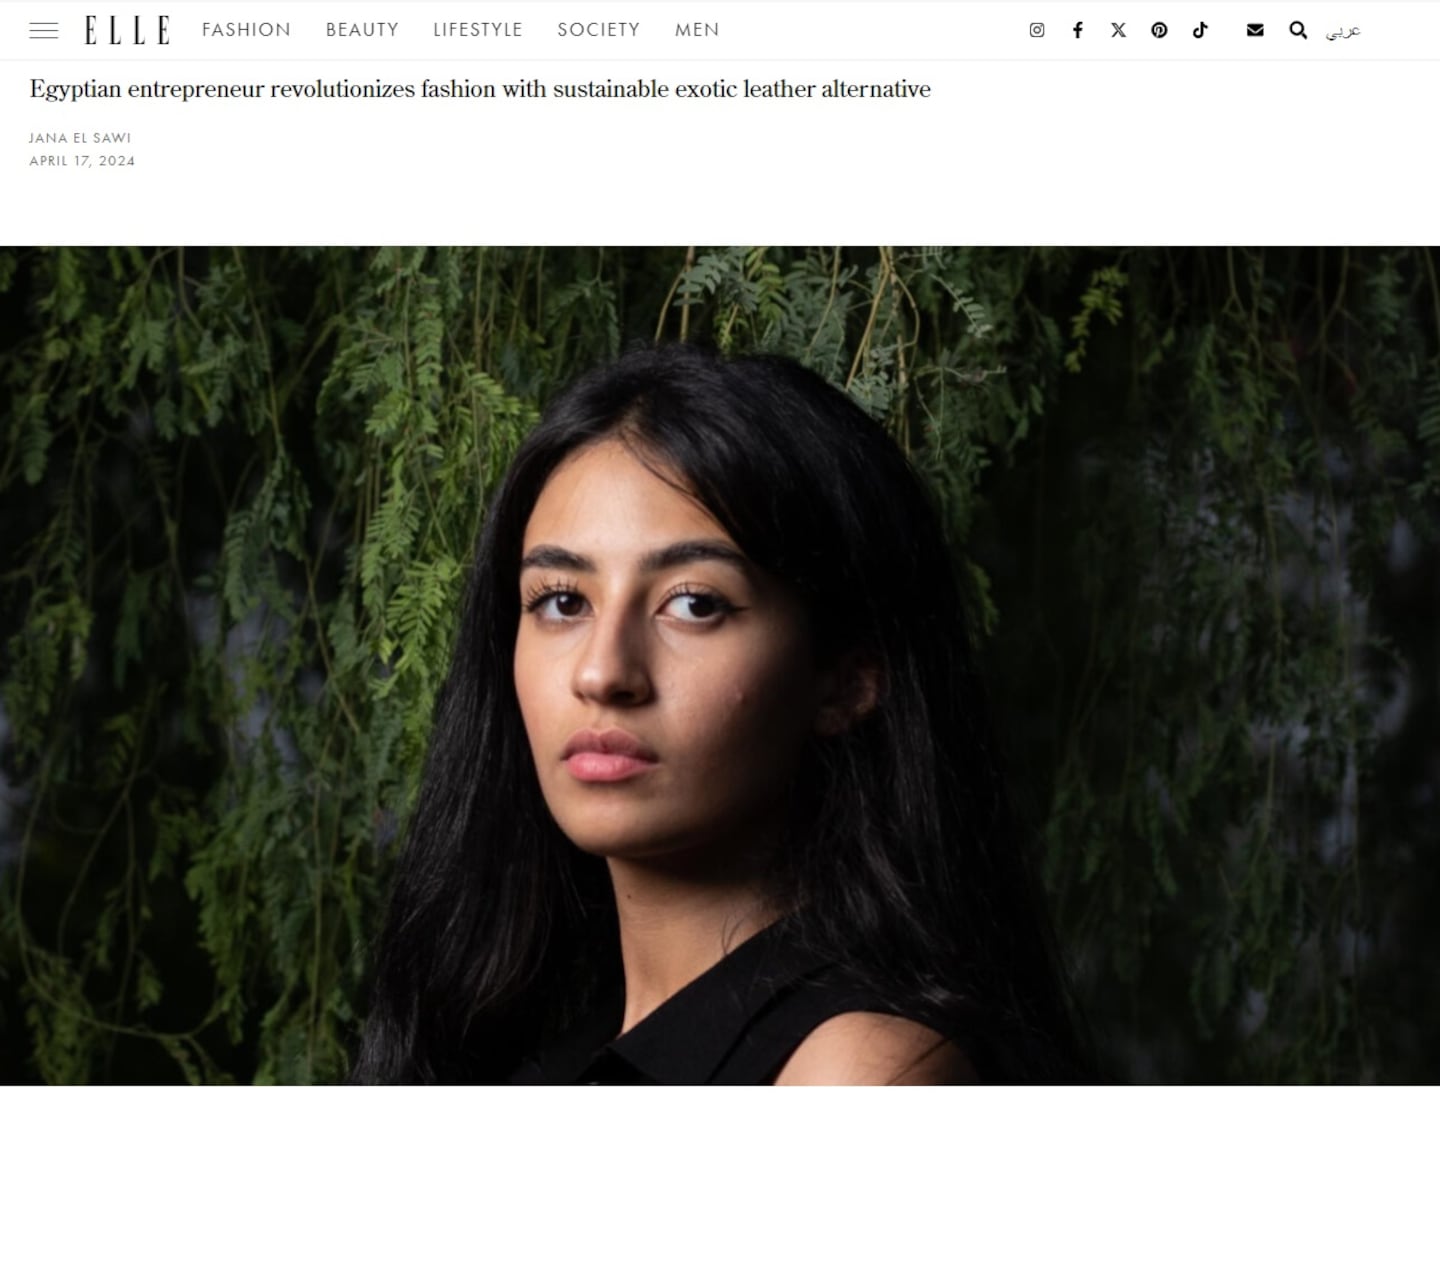 Lagardère Group and its licensing partner, Tunisian firm Nissa Editions Group, have launched the digital edition of Elle Egypt, based in Cairo.